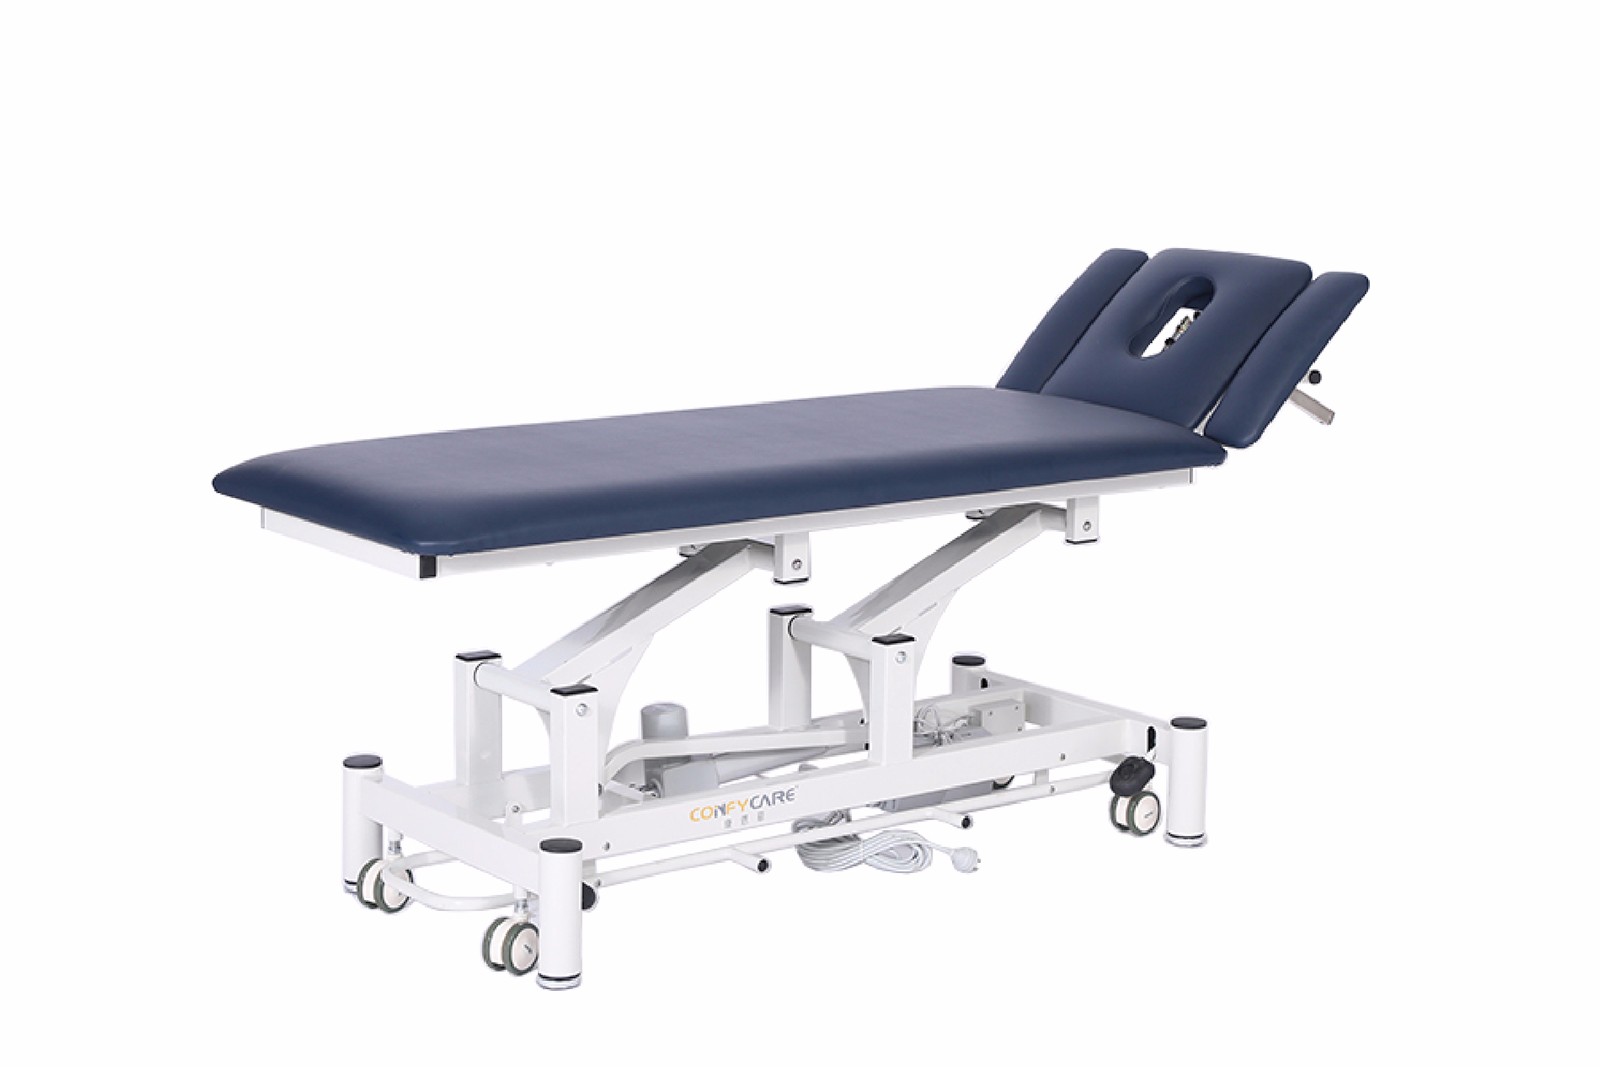 Lumbar traction bed